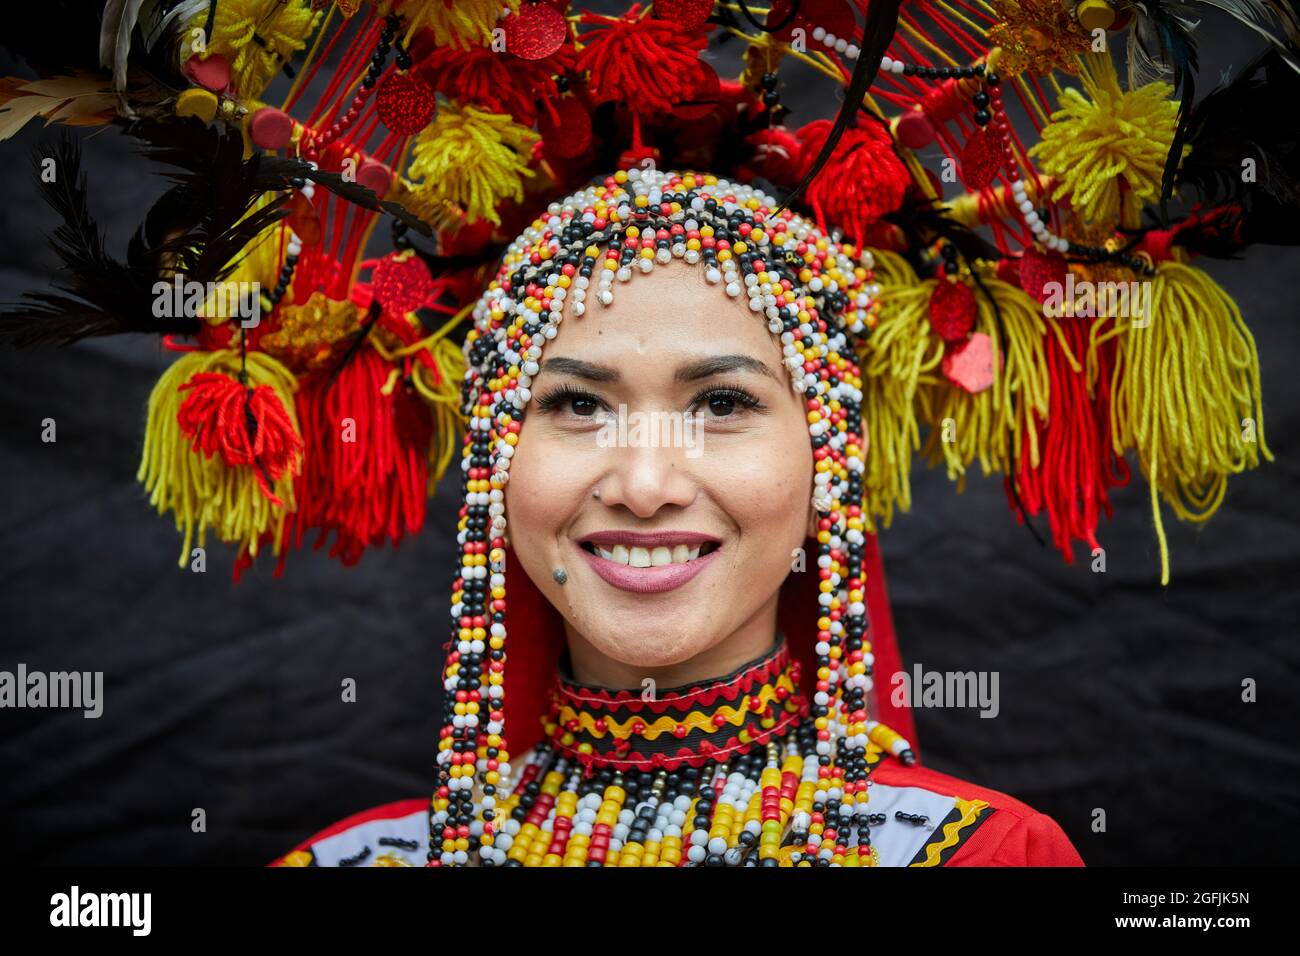 Young lady dressed in traditional Thailand rural village tribe costume and headdress in Manchester, England, UK Stock Photo